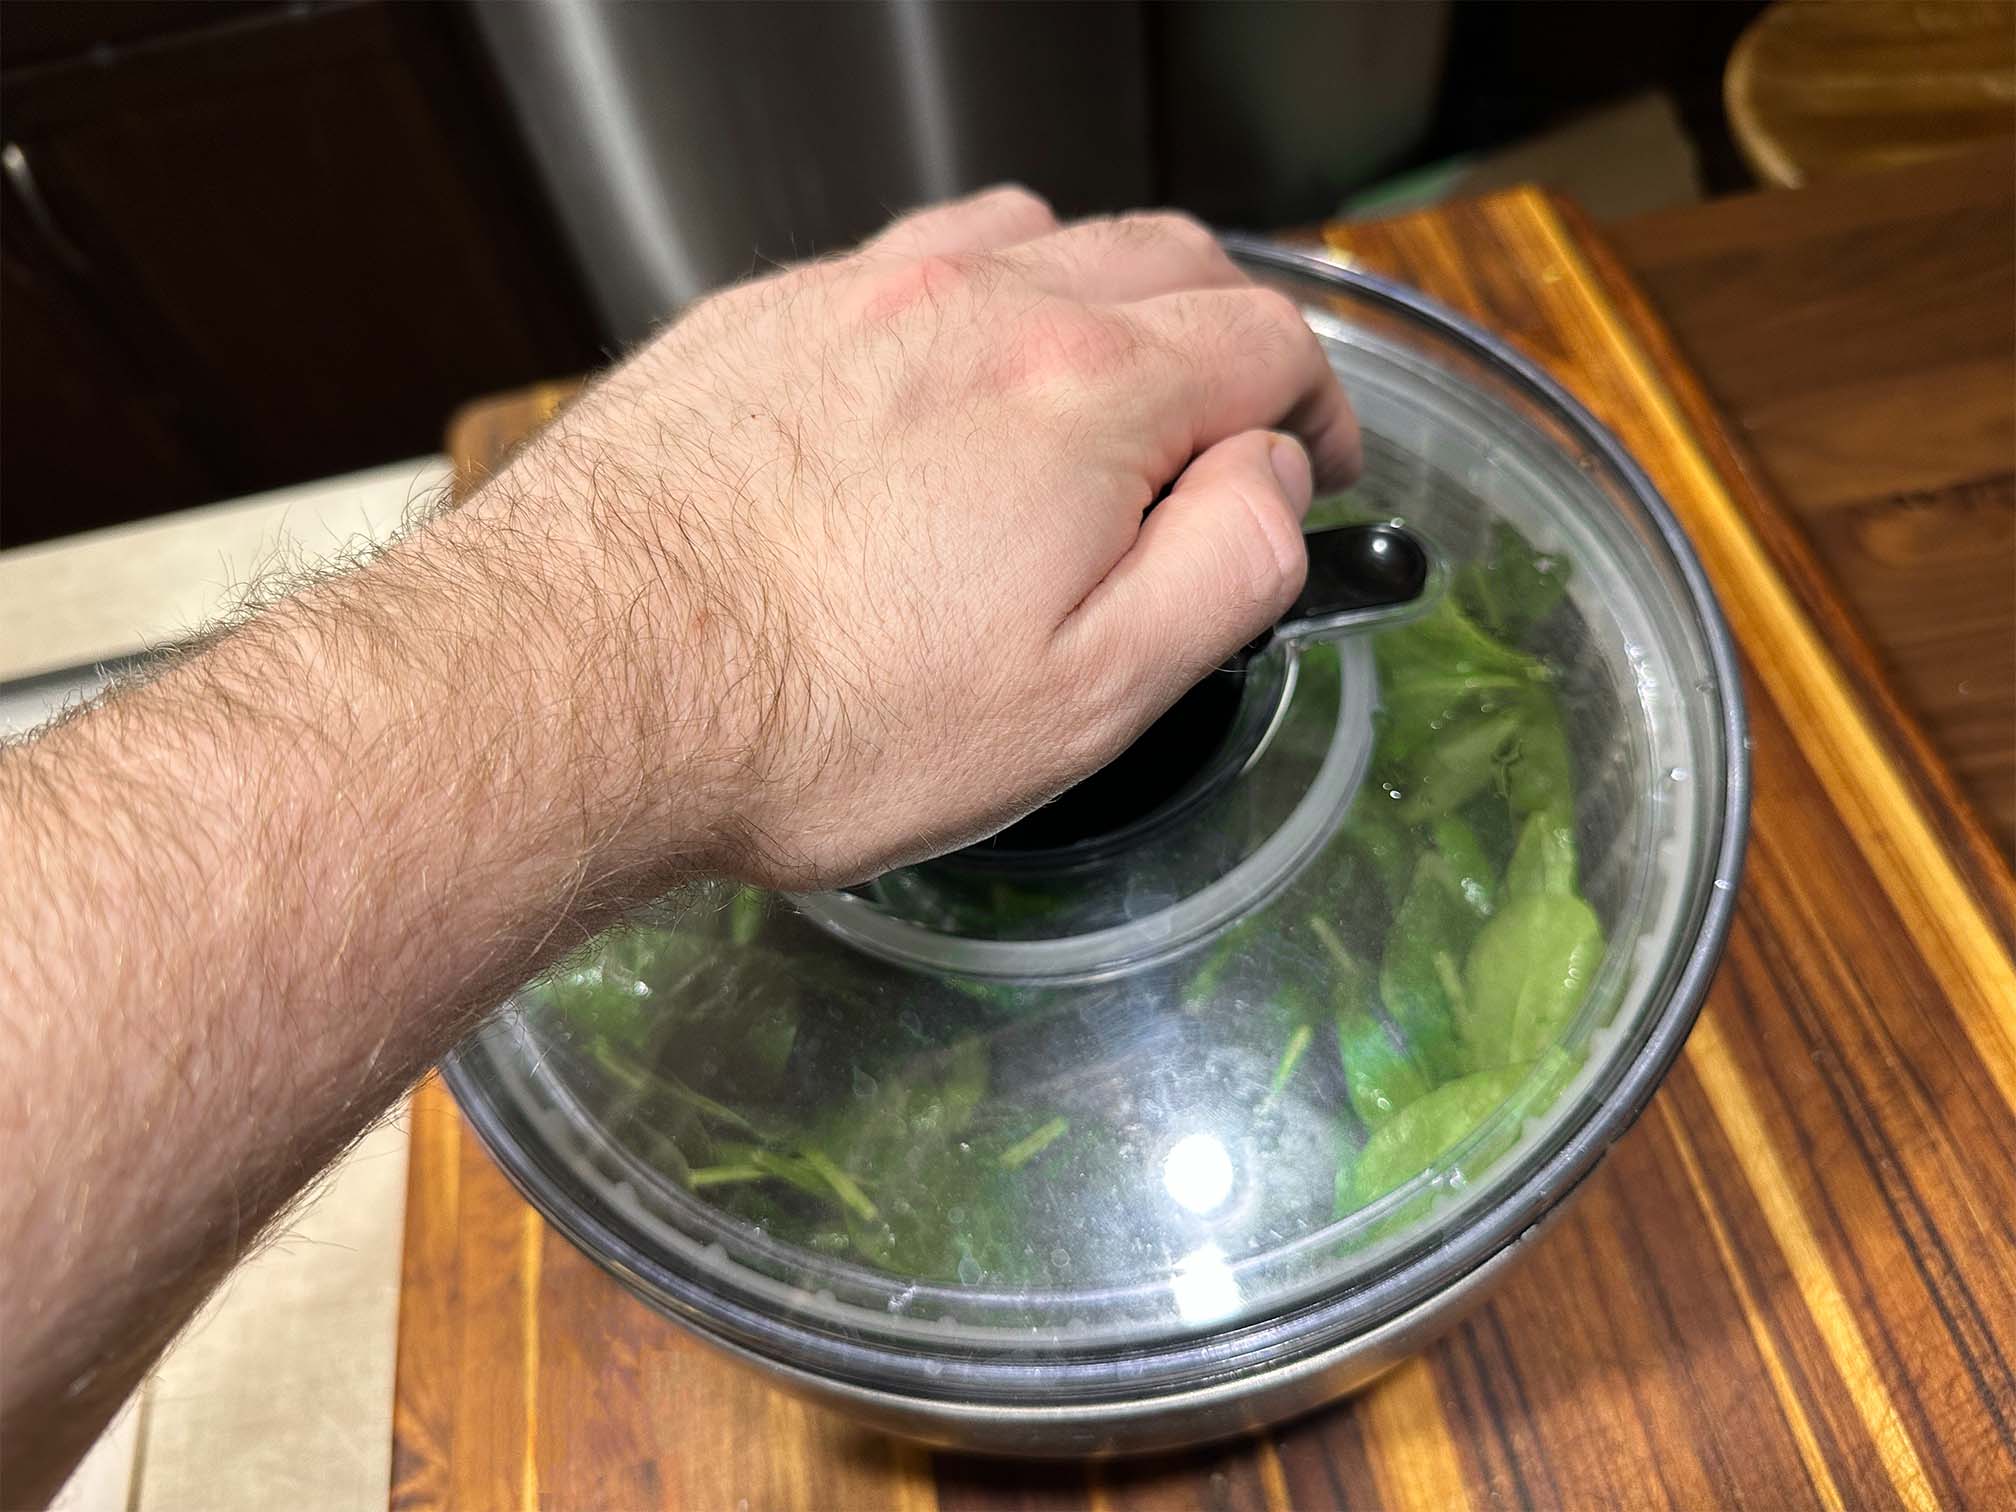 OXO Stainless Steel Salad Spinner + Reviews